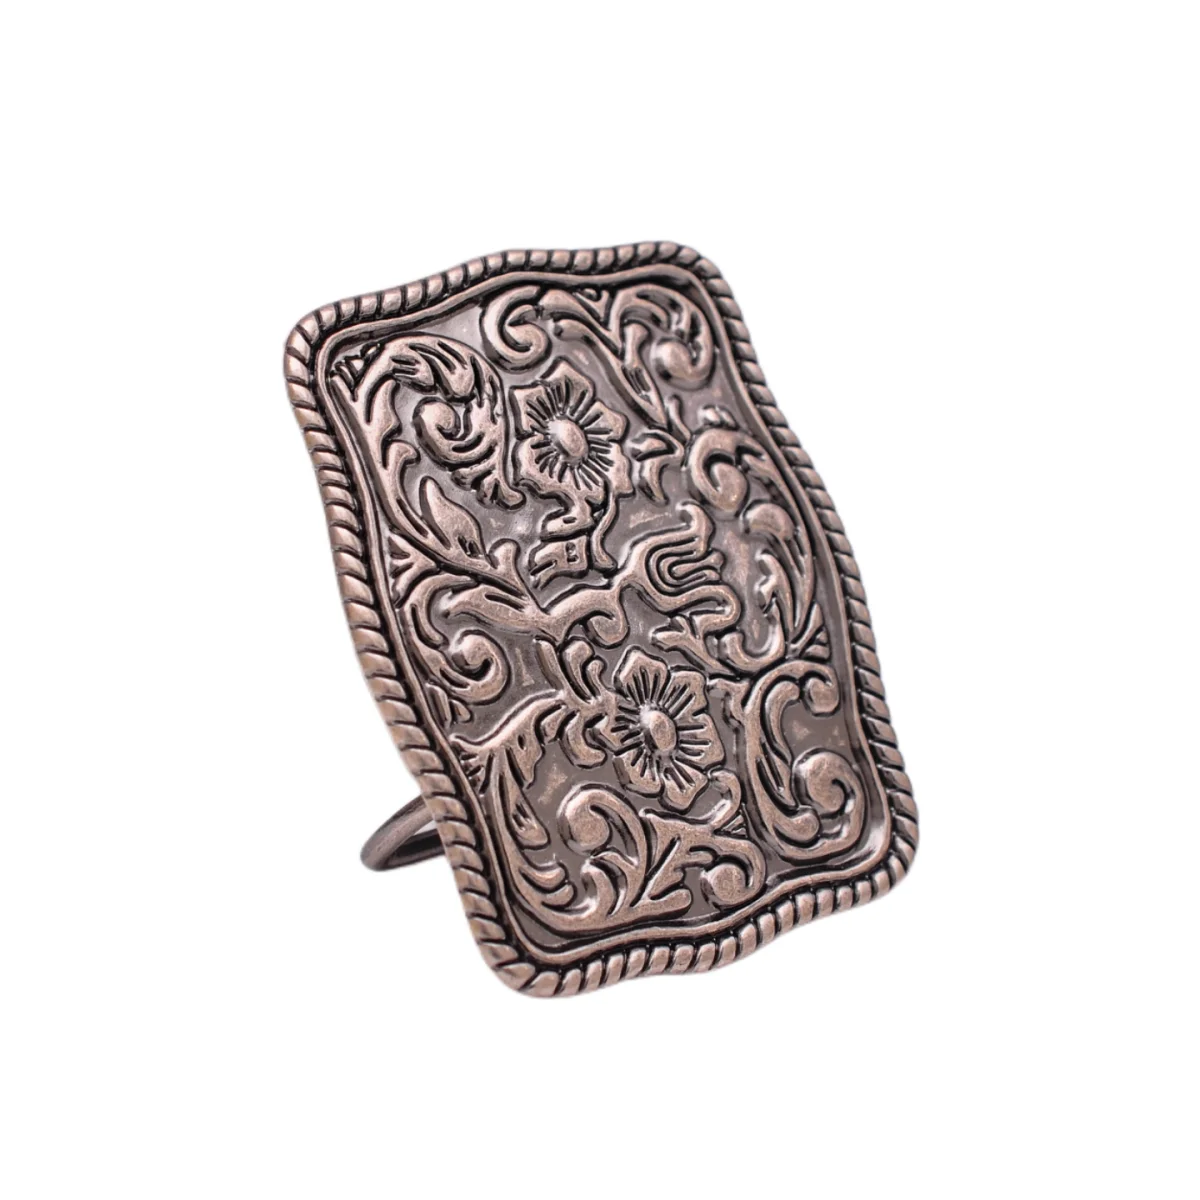 

Sturdy Silver Rectangle Western Flower Rodeo Ranger Rope Side Cowboy Cowgirl Leathercraft Belt Buckle Replacement fit 41mm